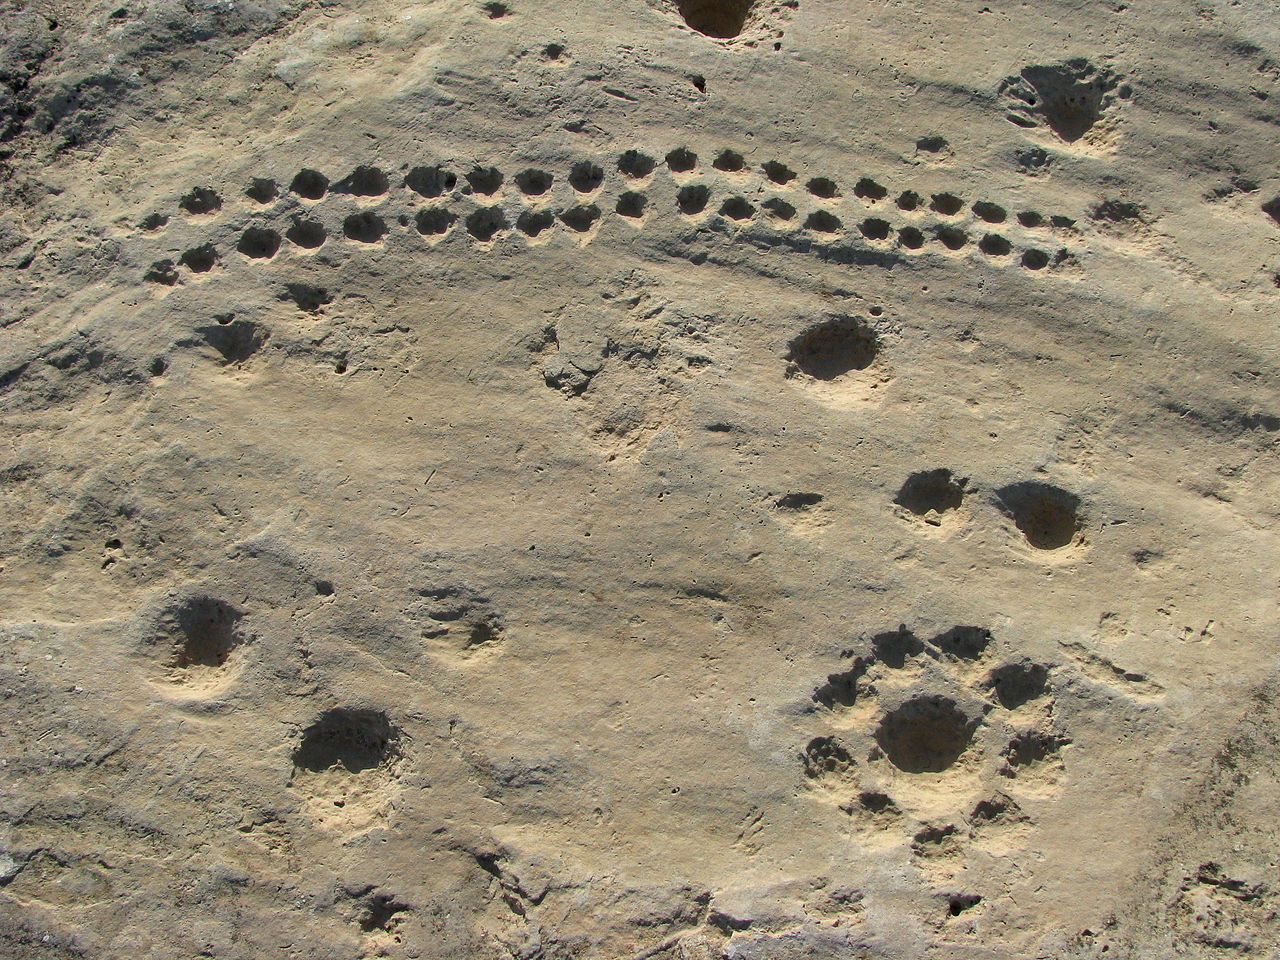 Most of the rock carvings in Al Jassasiya resemble cup marks. Some are arranged in obvious patterns while others appear to be completely random. Credit: Wikimedia Commons/CC BY 2.0